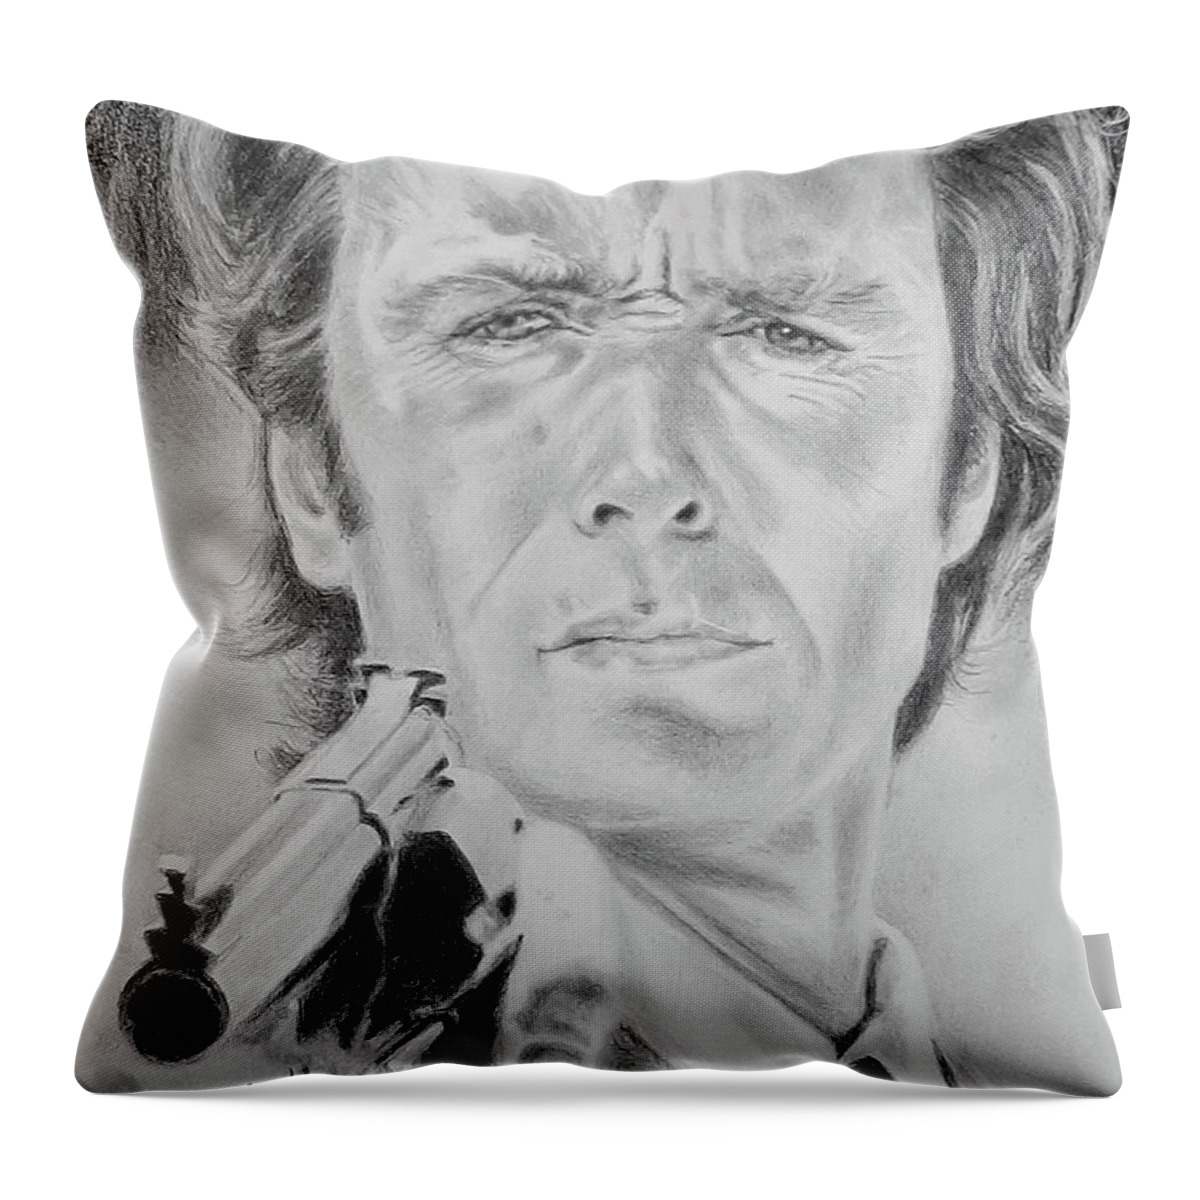 Clint Eastwood Throw Pillow featuring the drawing Dirty Harry by Elaine Berger